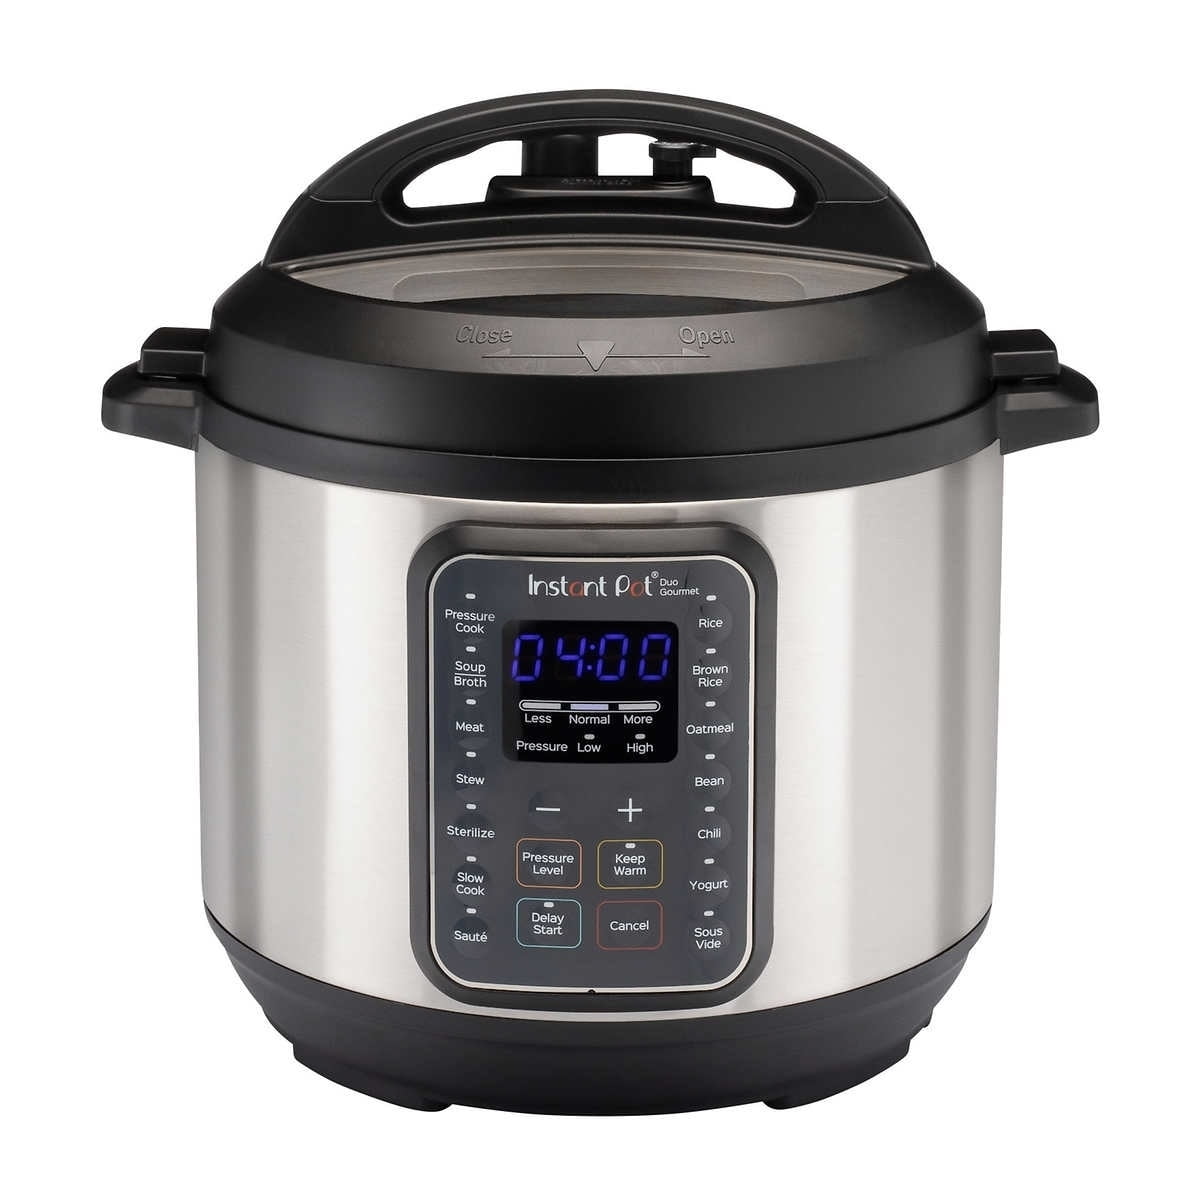 Getting Started with Instant Pot Duo Gourmet 6qt from Costco